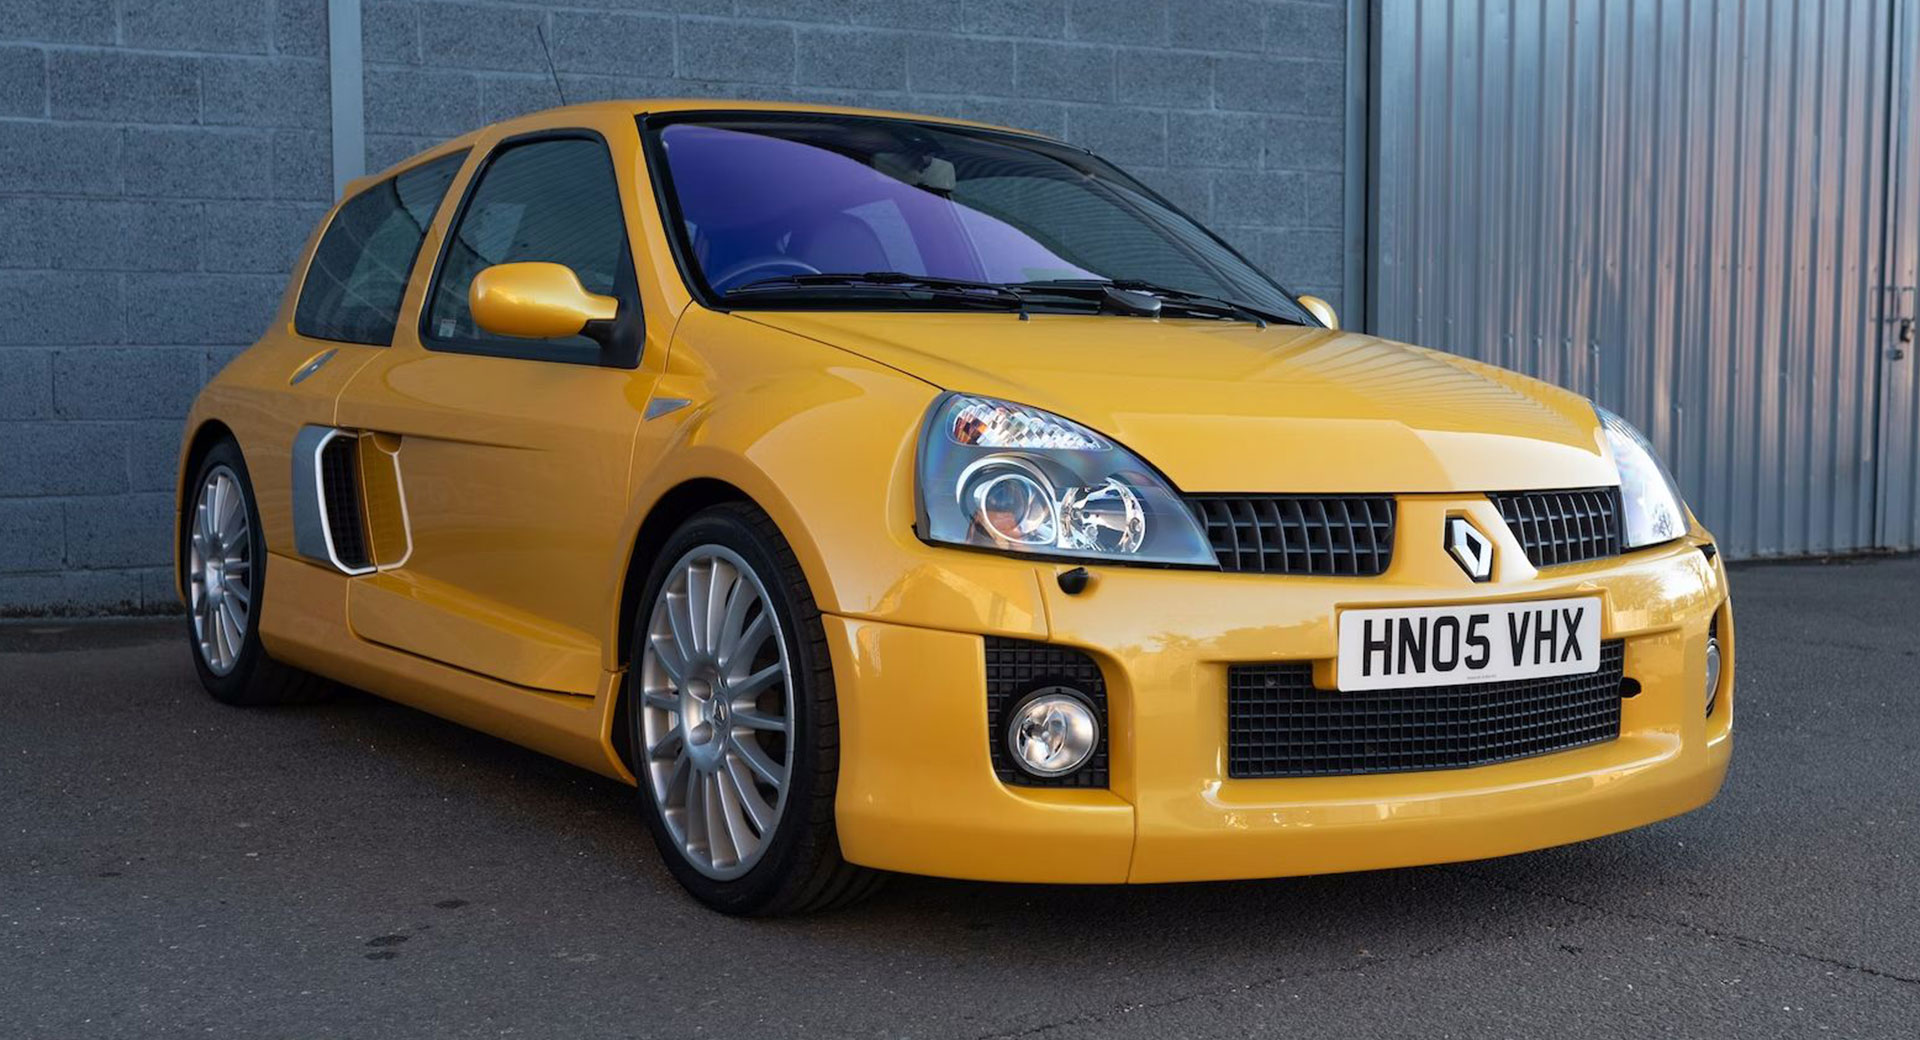 CarScoops Garage: This Is Our 2011 Renault Clio RS 200 AGP